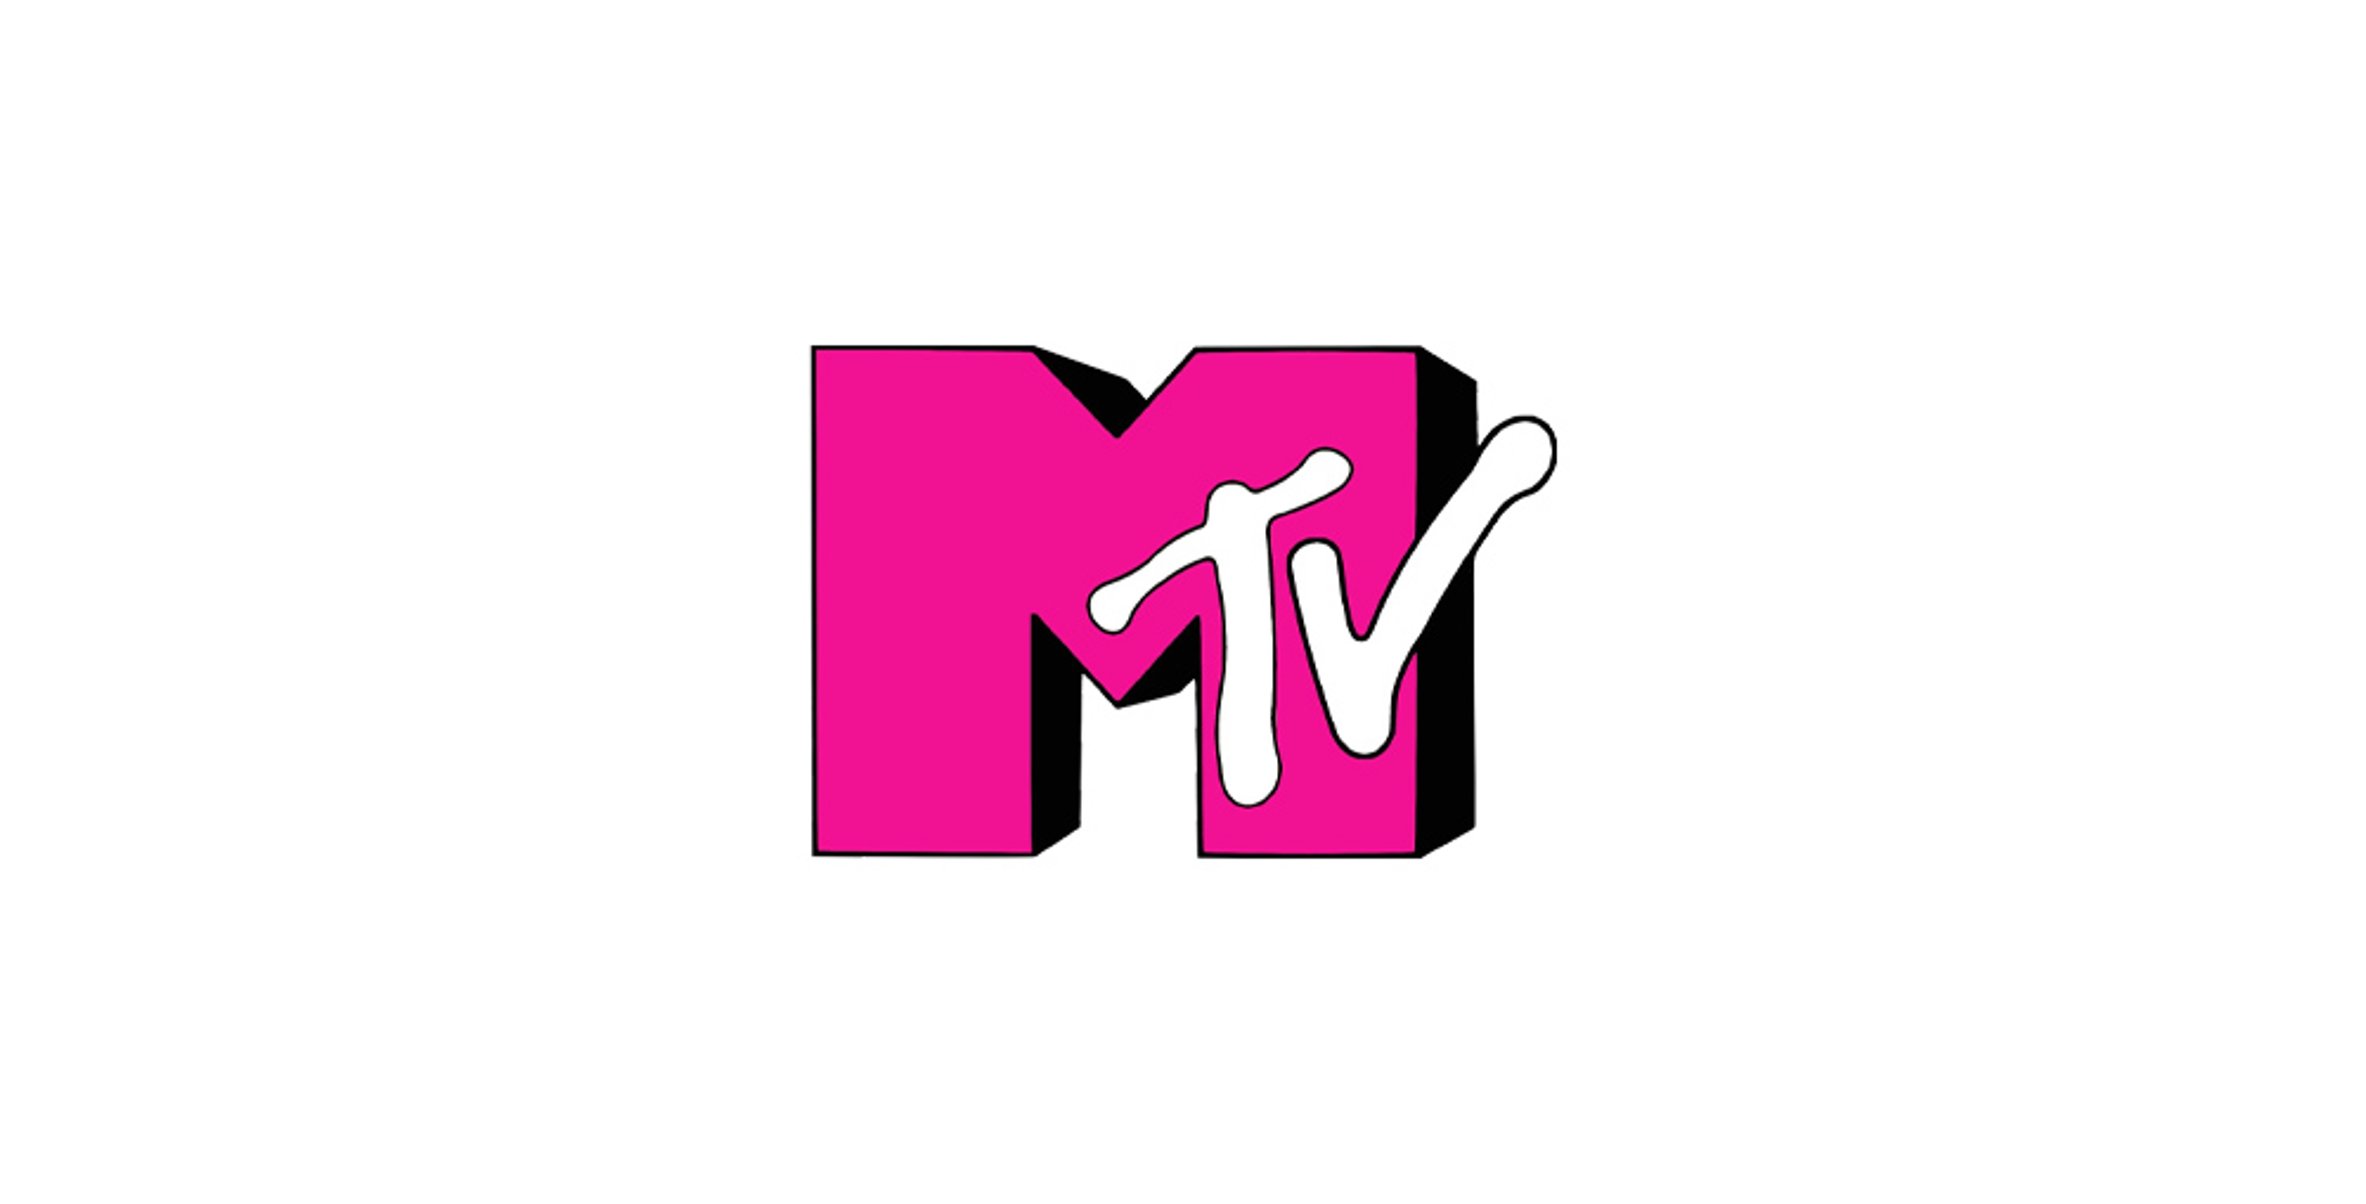 Casting Males & Females For A New MTV Show!